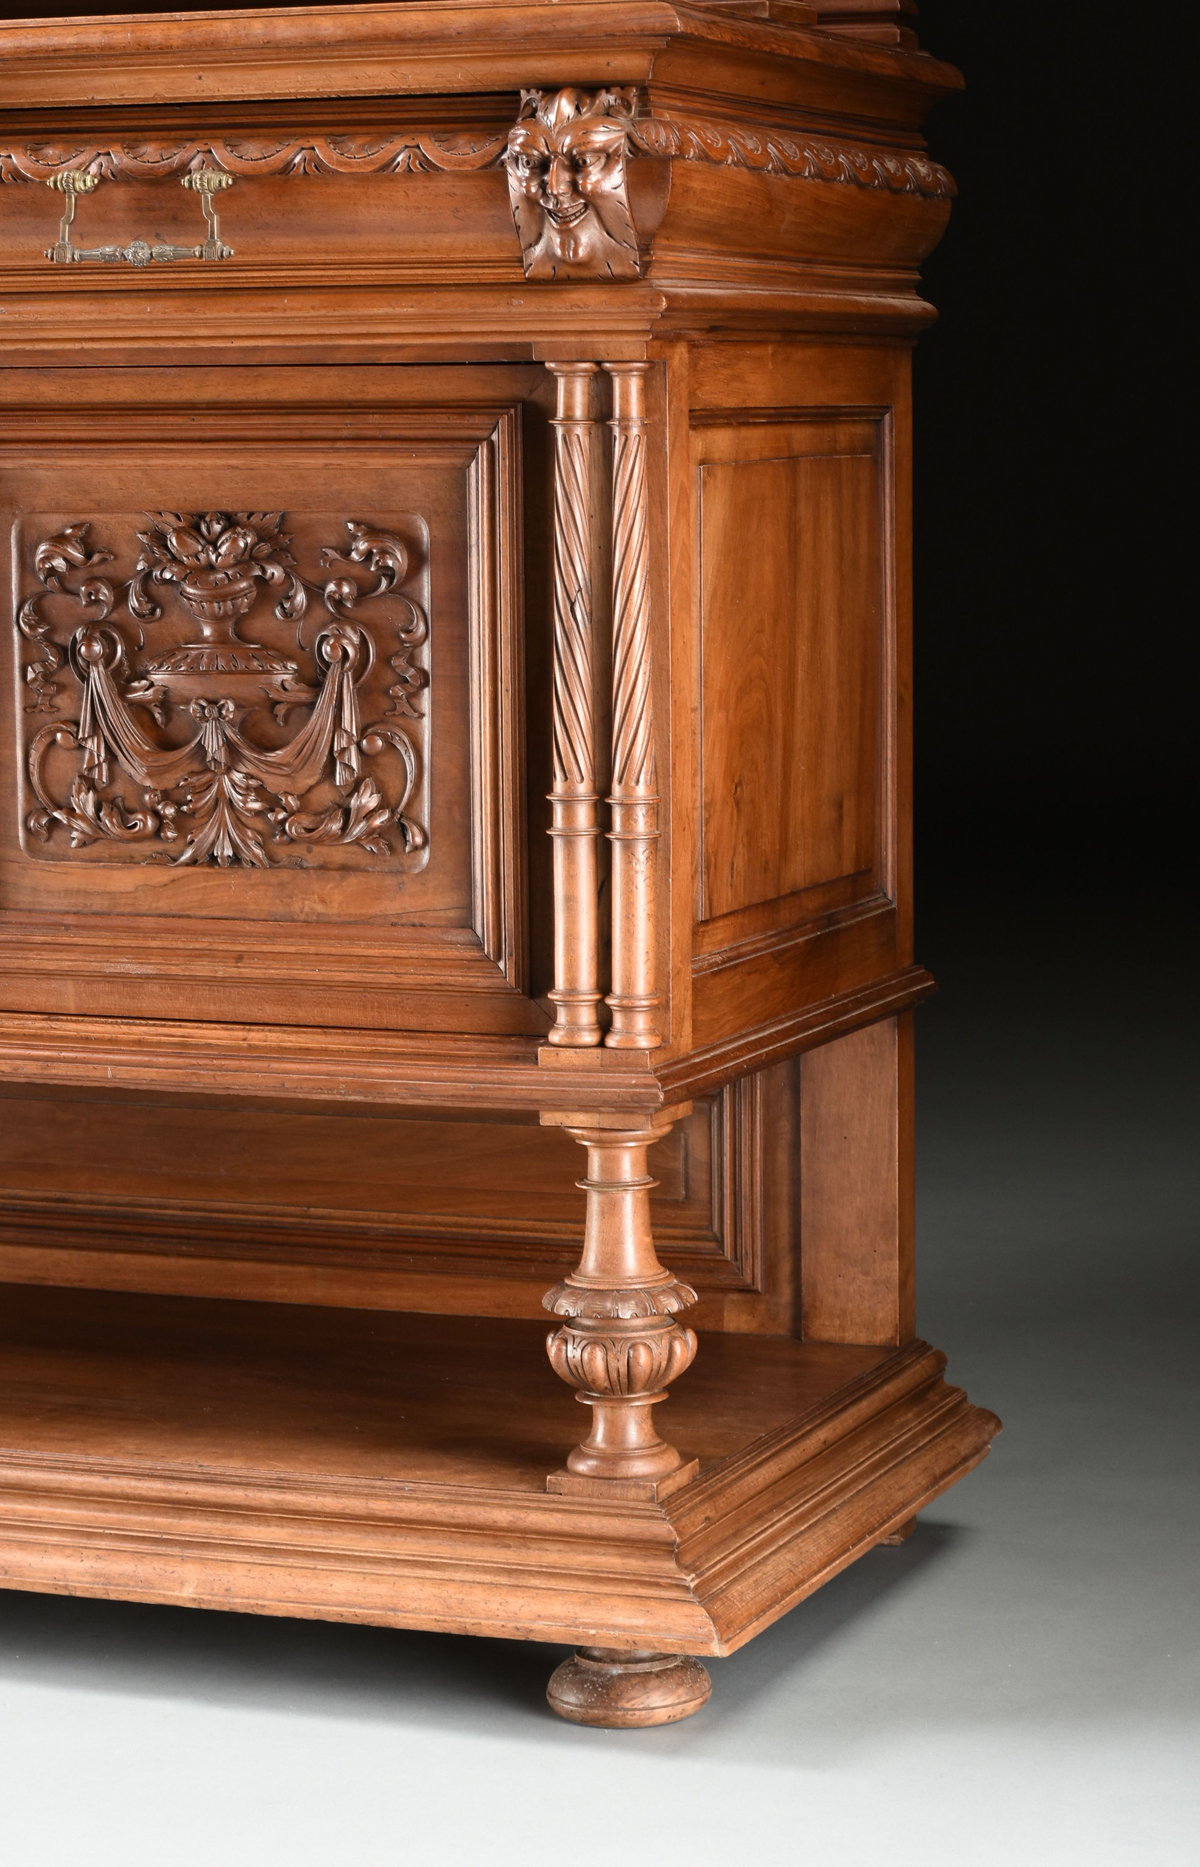 A RENAISSANCE REVIVAL MARBLE INSET WALNUT BUFFET Ã€ DEUX CORPS, FRENCH, SECOND HALF 19TH CENTURY, - Image 12 of 15